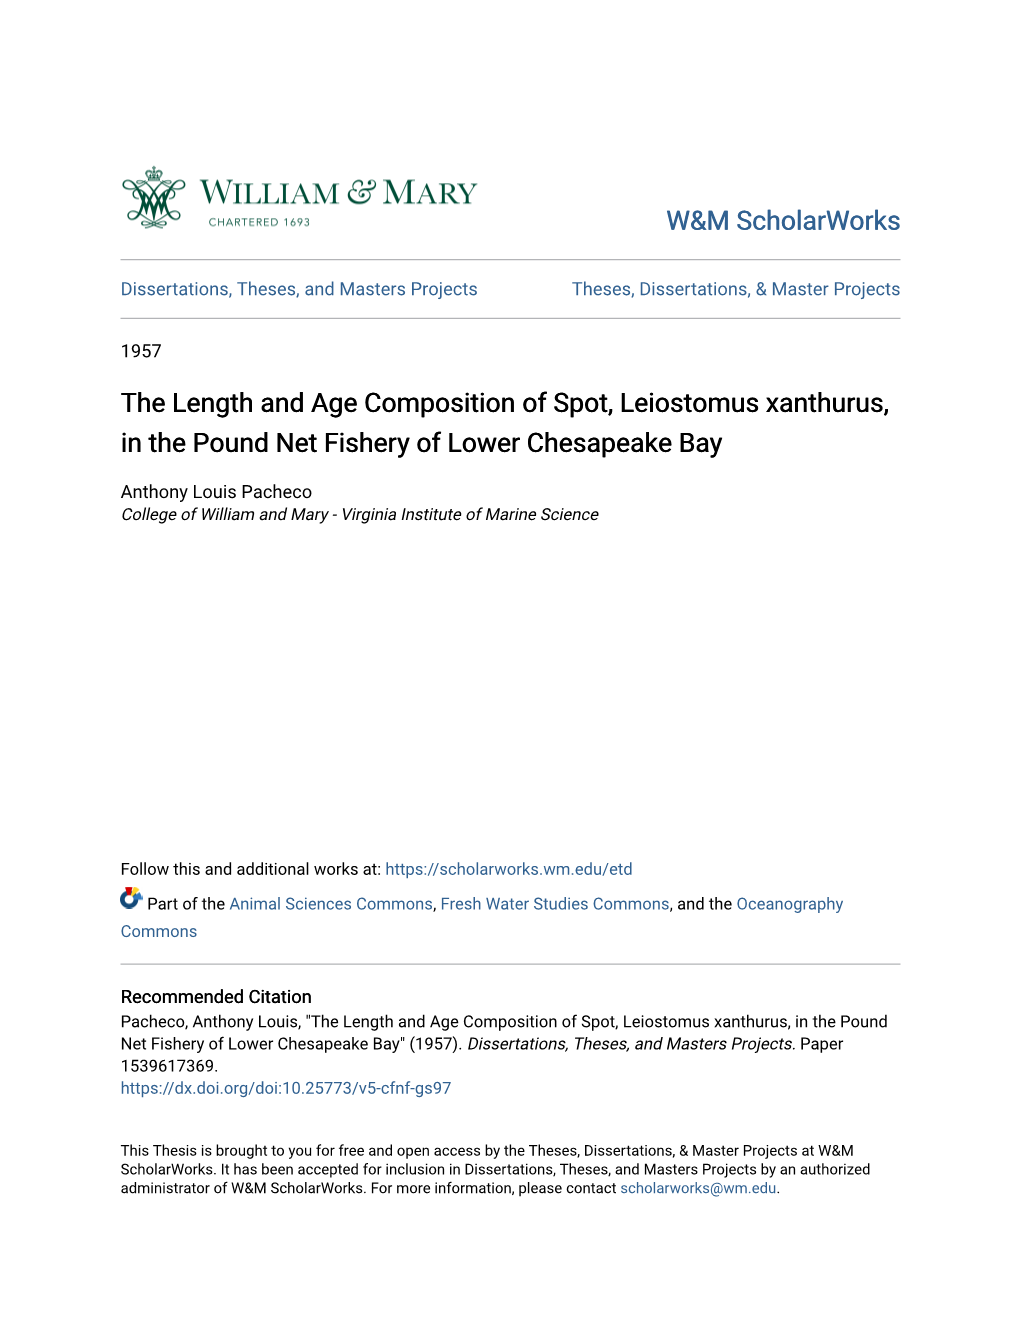 The Length and Age Composition of Spot, Leiostomus Xanthurus, in the Pound Net Fishery of Lower Chesapeake Bay